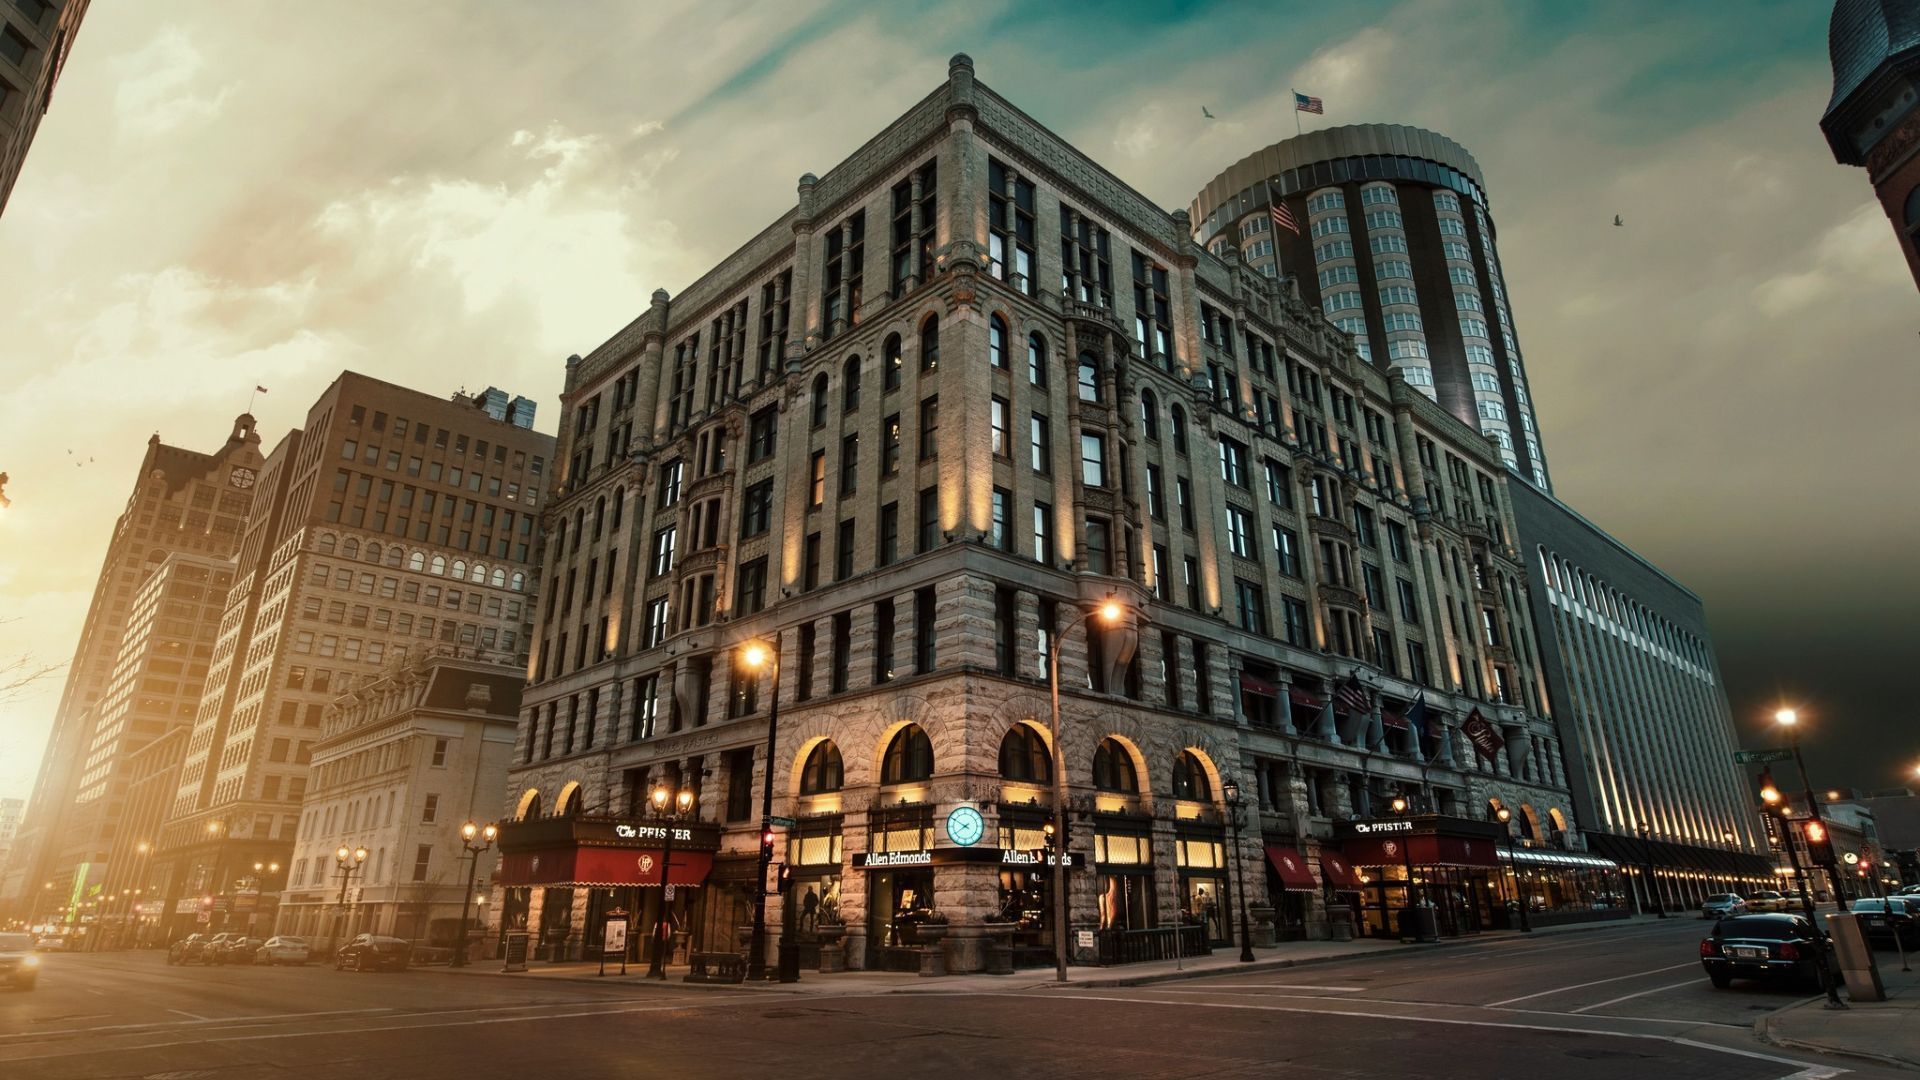 11 Of The Most Haunted Hotels In The World